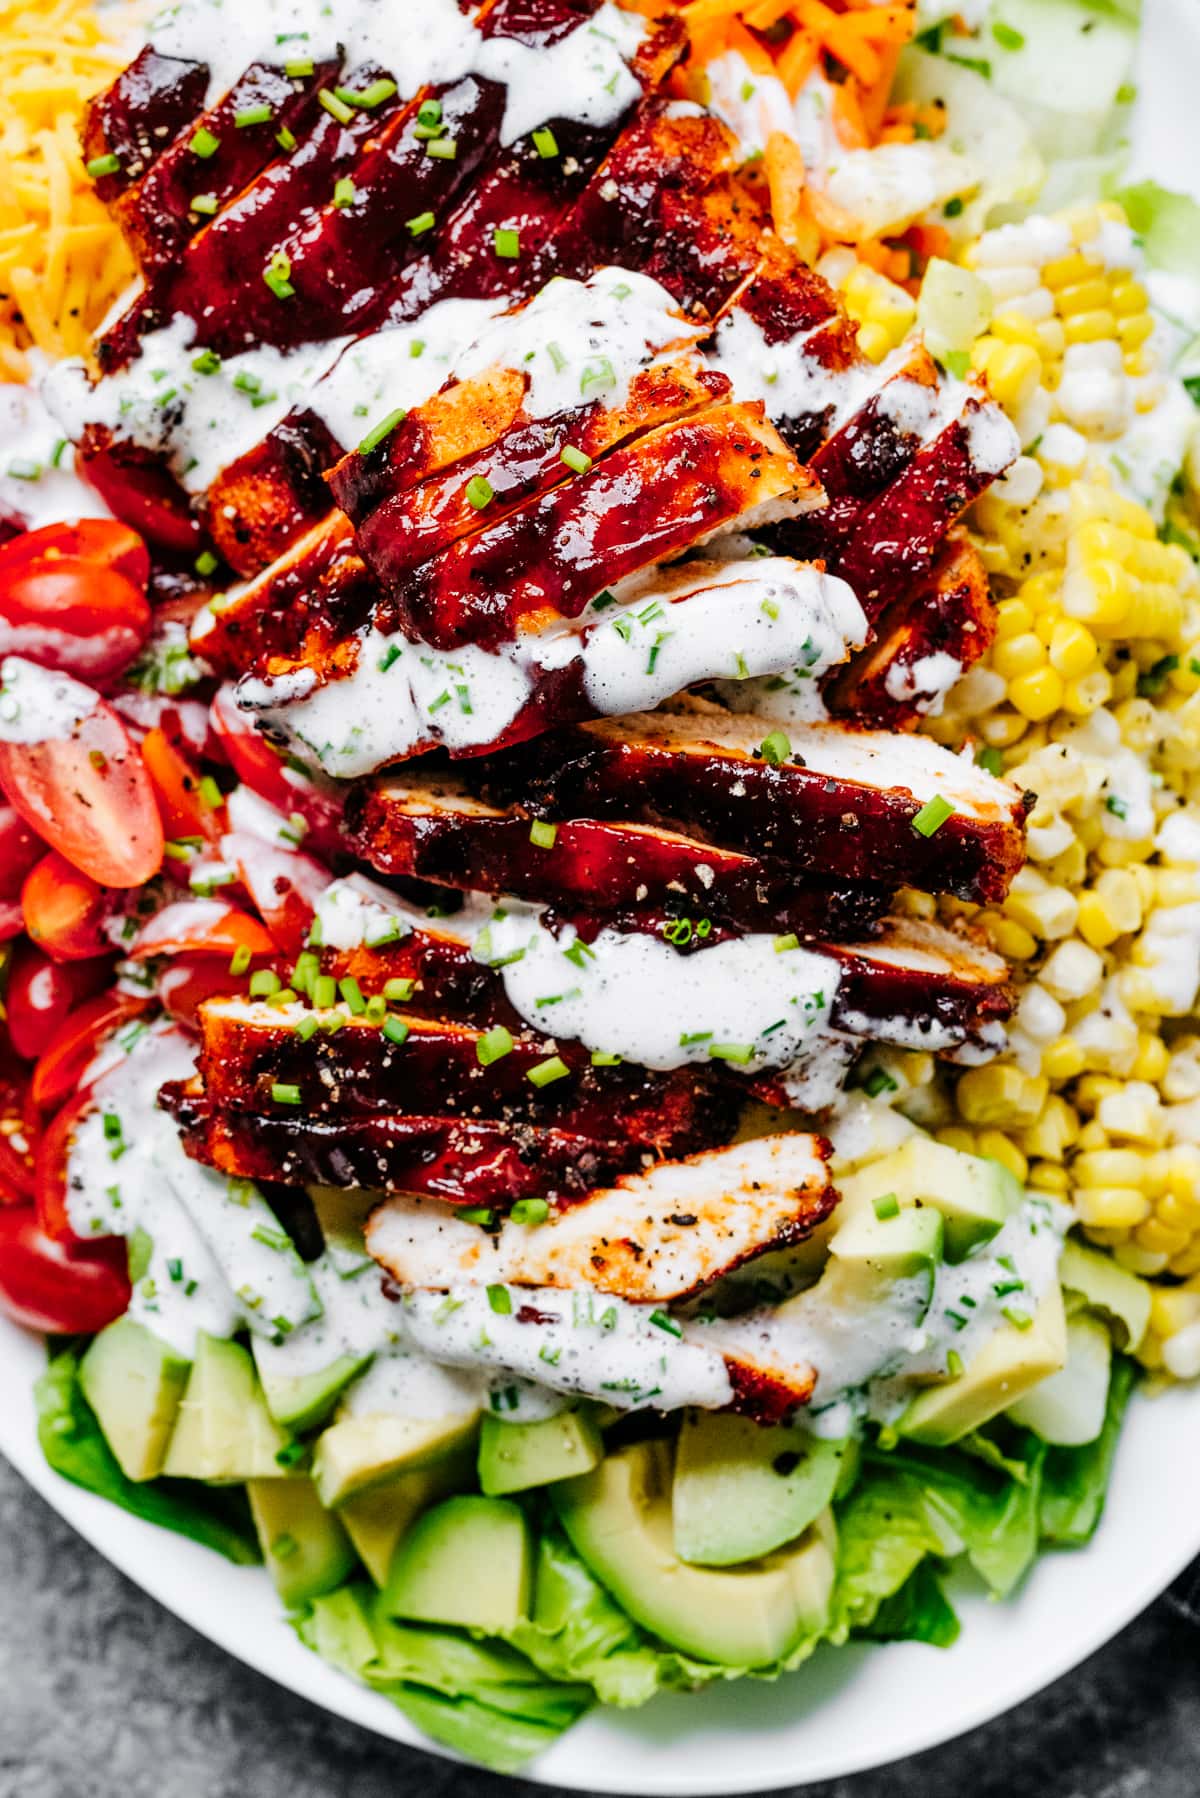 Salad greens, sliced chicken, tomatoes, diced avocados, corn, and cheeses are arranged on an oval serving platter, all drizzled with a creamy dressing over the top.